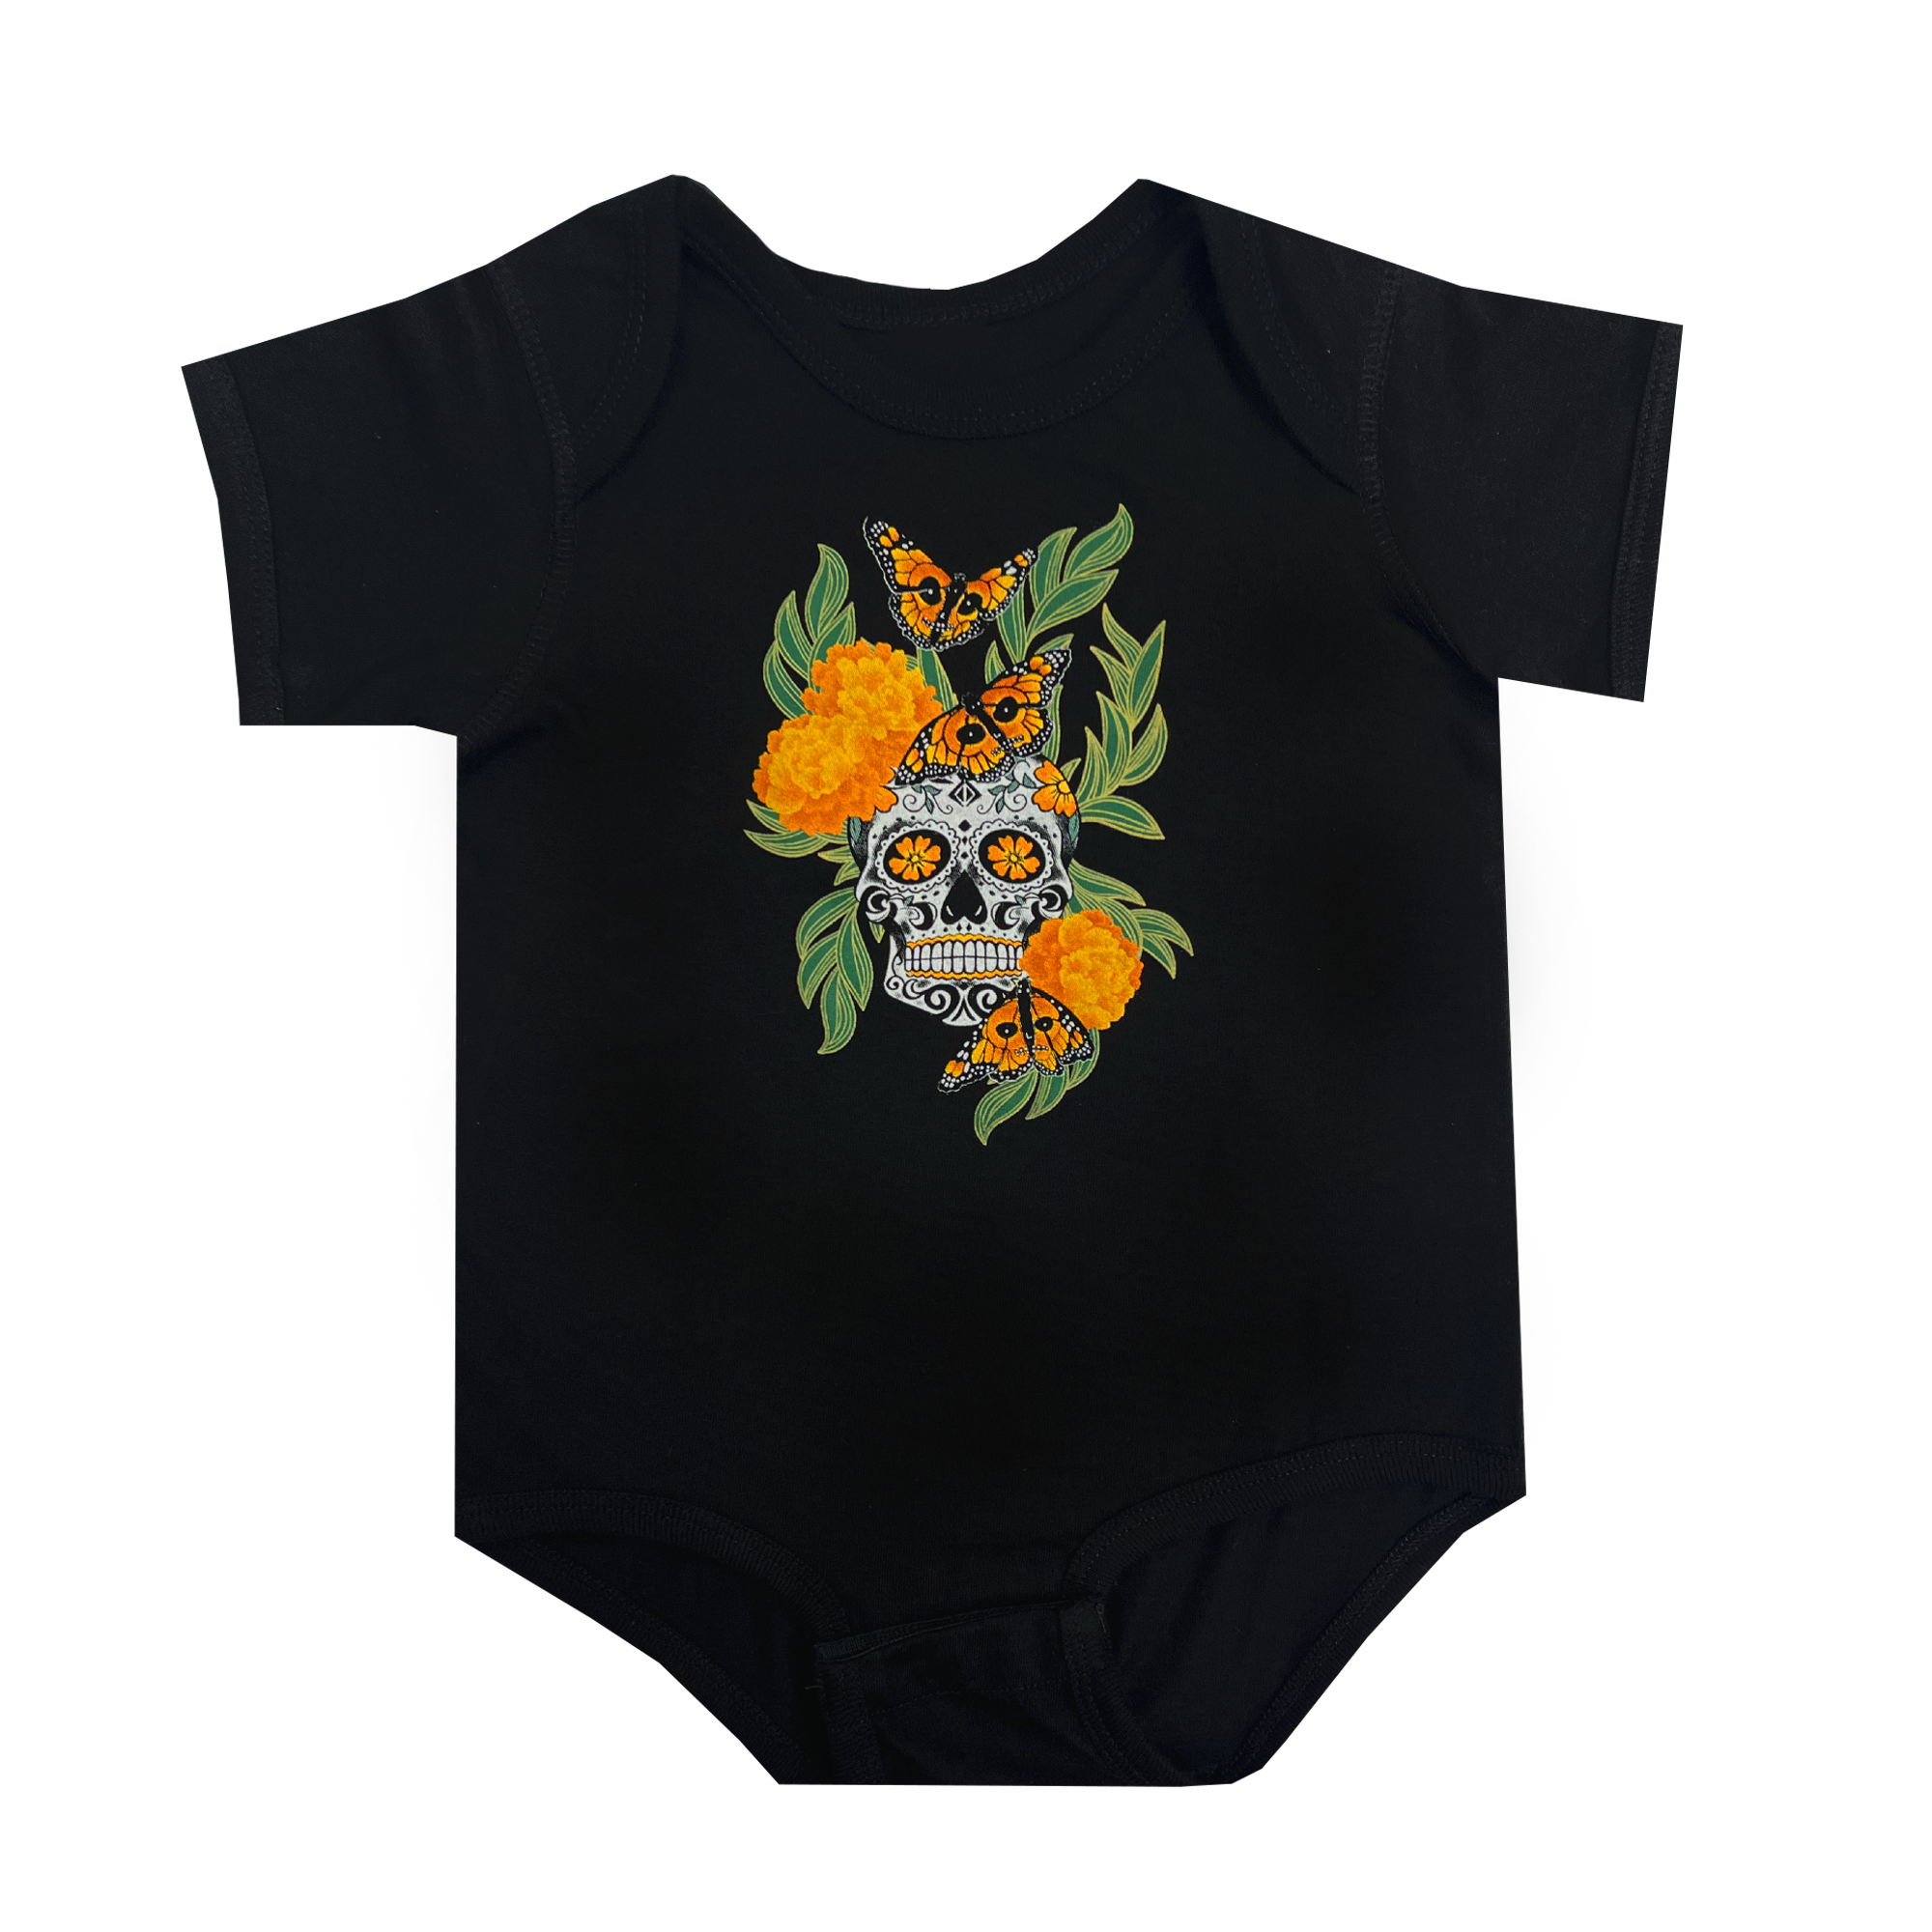  Baby one-piece in black with graphic art by Oakland artist Jet Martinez depicting a sugar skull surrounded by Marigolds and Monarch butterflies.